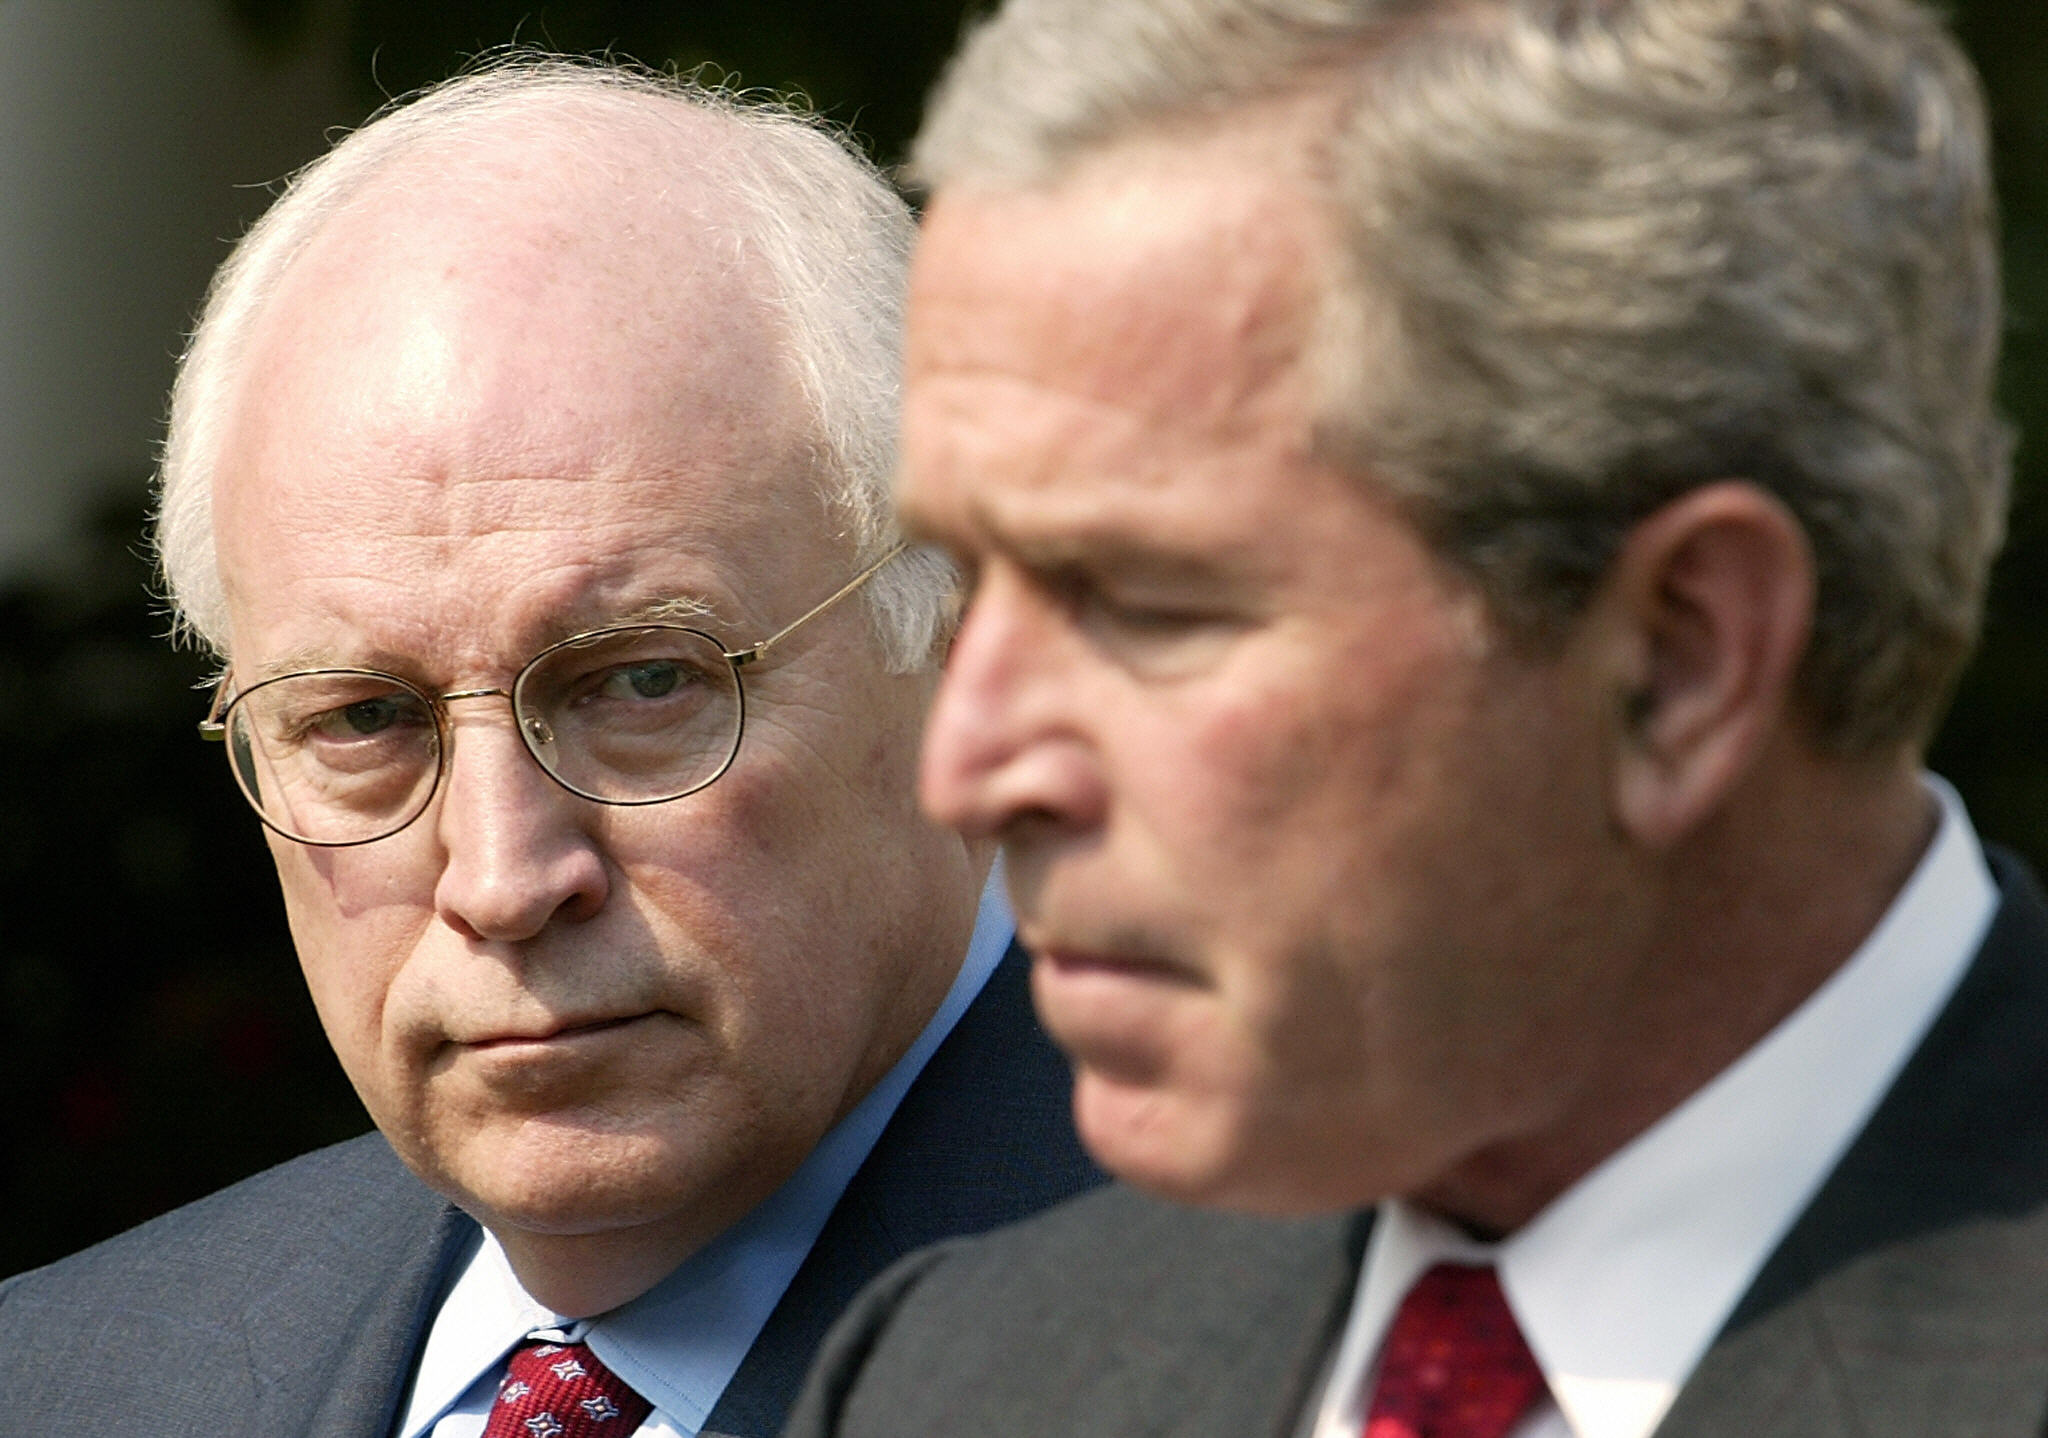 Liar Dick Cheney Who Destroyed Millions of Lives Declares Donald Trump the Greatest Threat in U.S. History